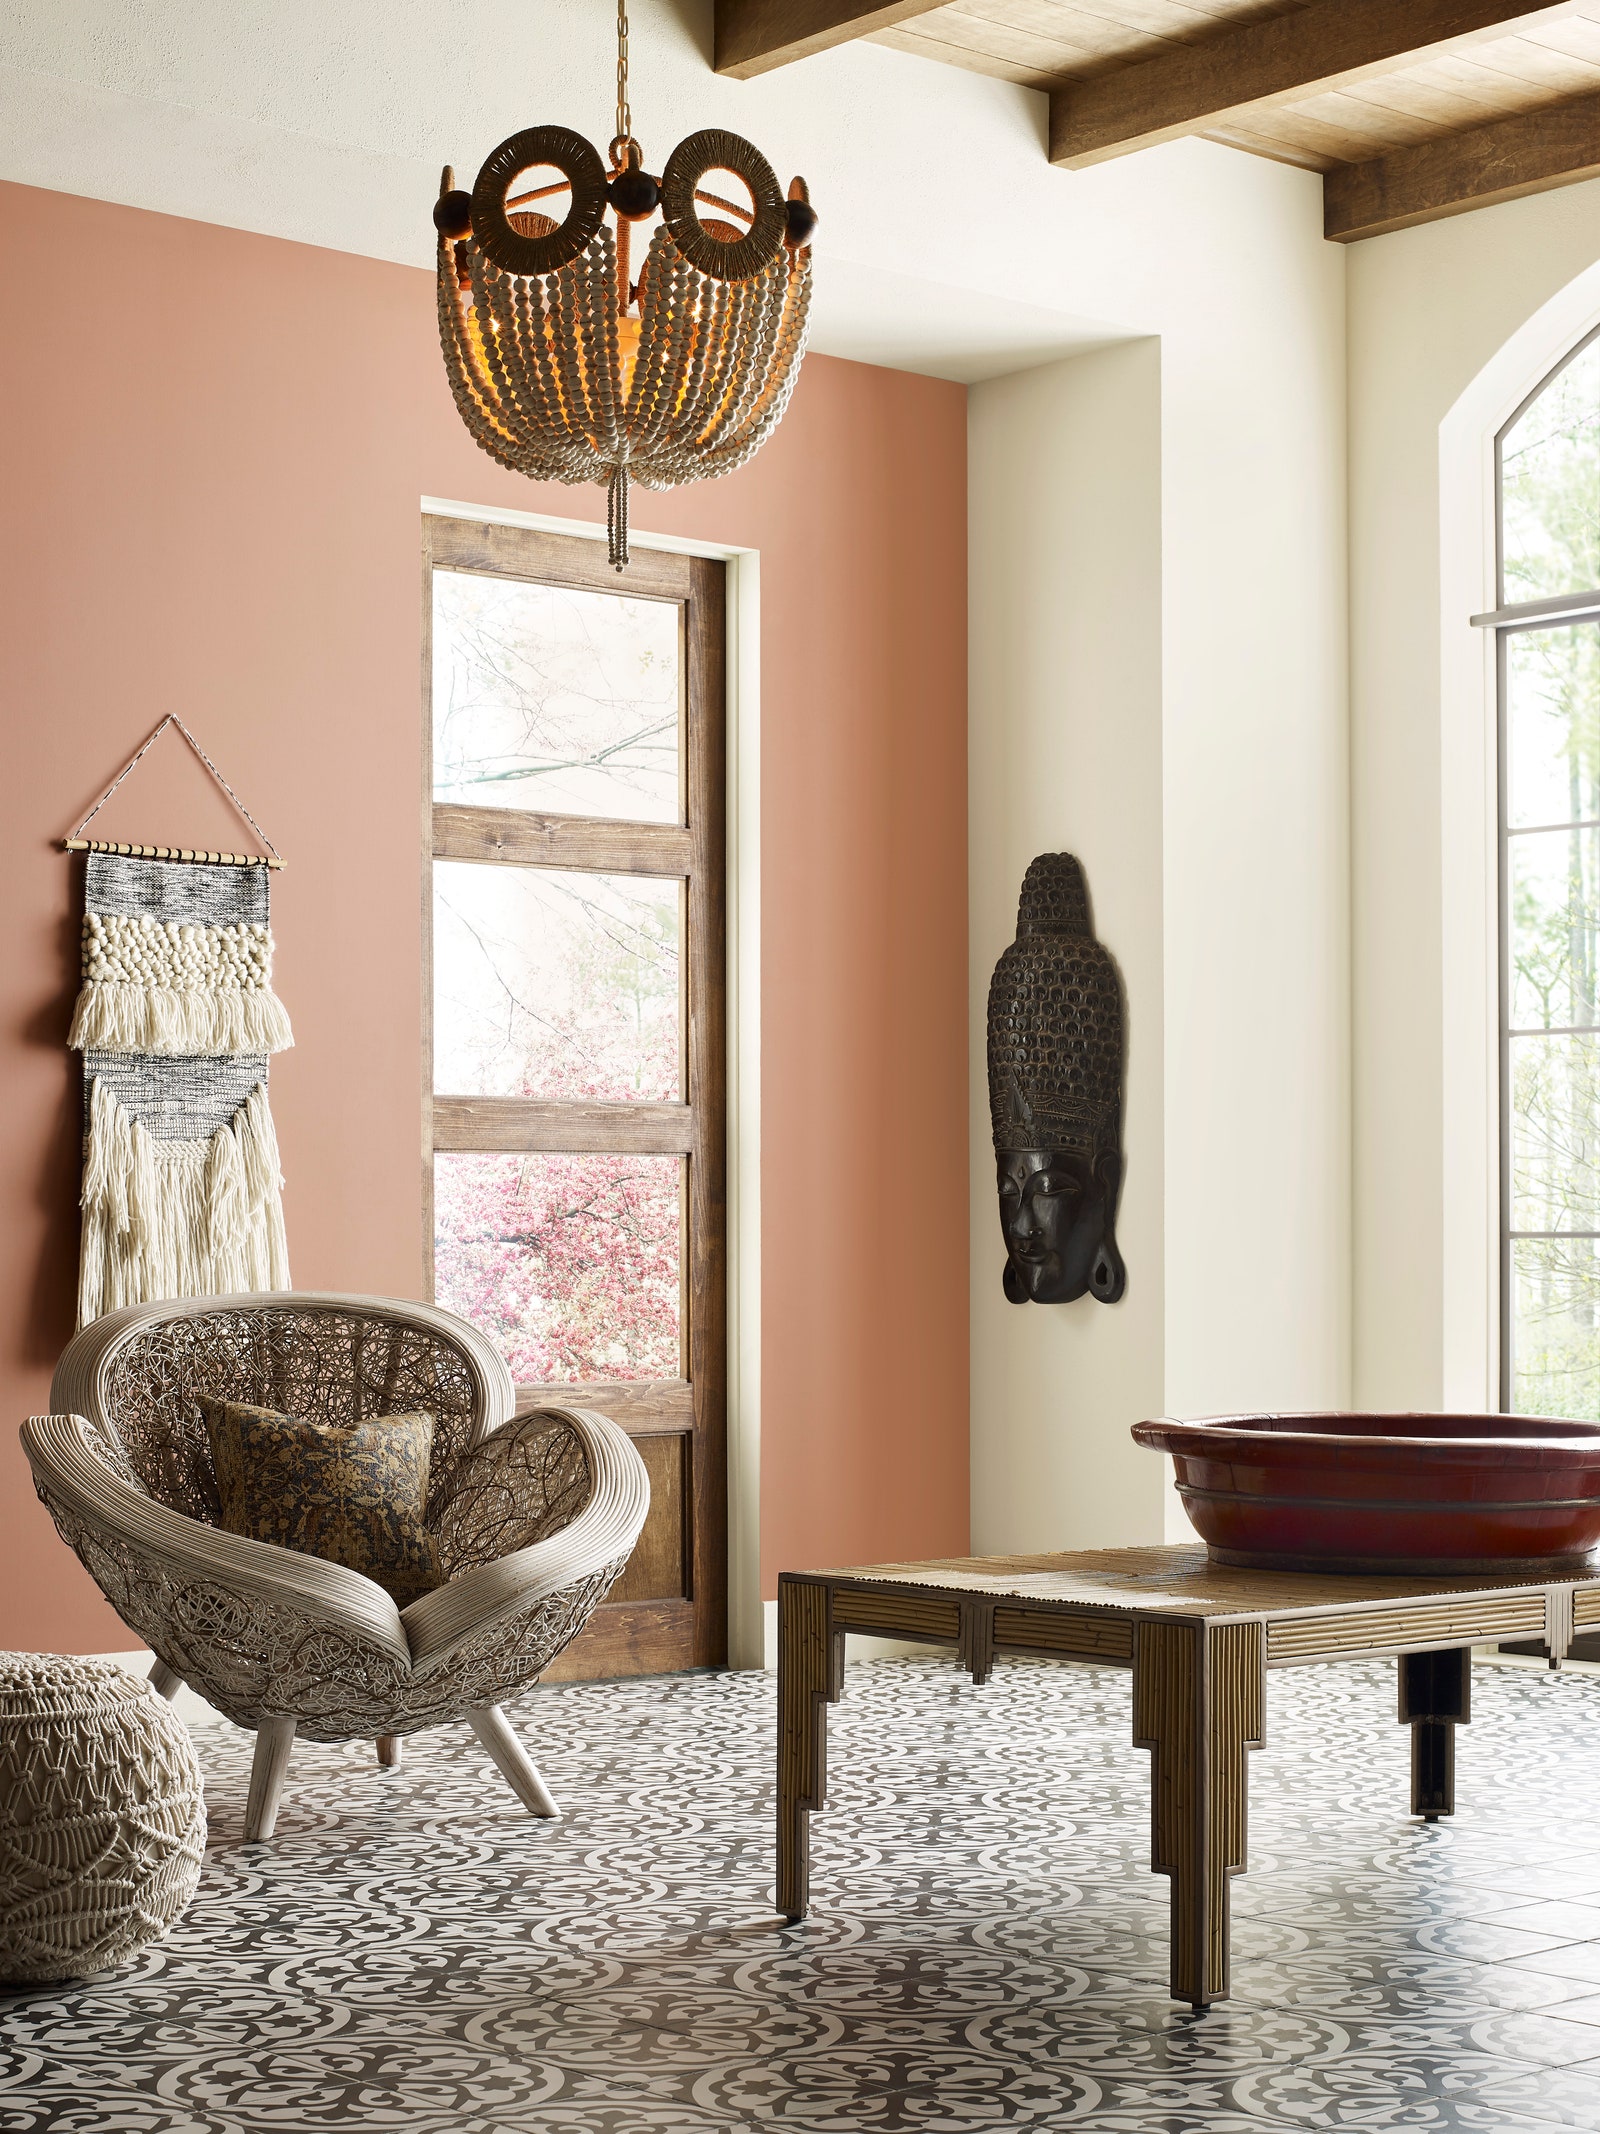 Sherwin-Williams 2021 Colormix Forecast Reddened earth paint showcase